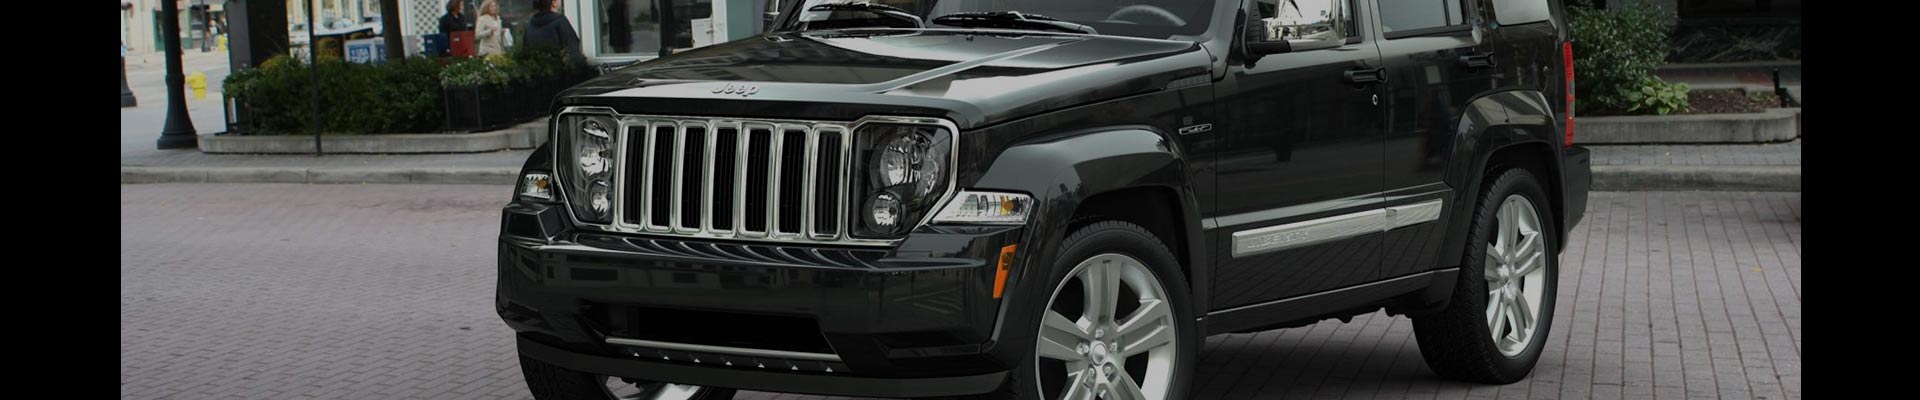 Shop Replacement and OEM 2009 Jeep Liberty Parts with Discounted Price on the Net